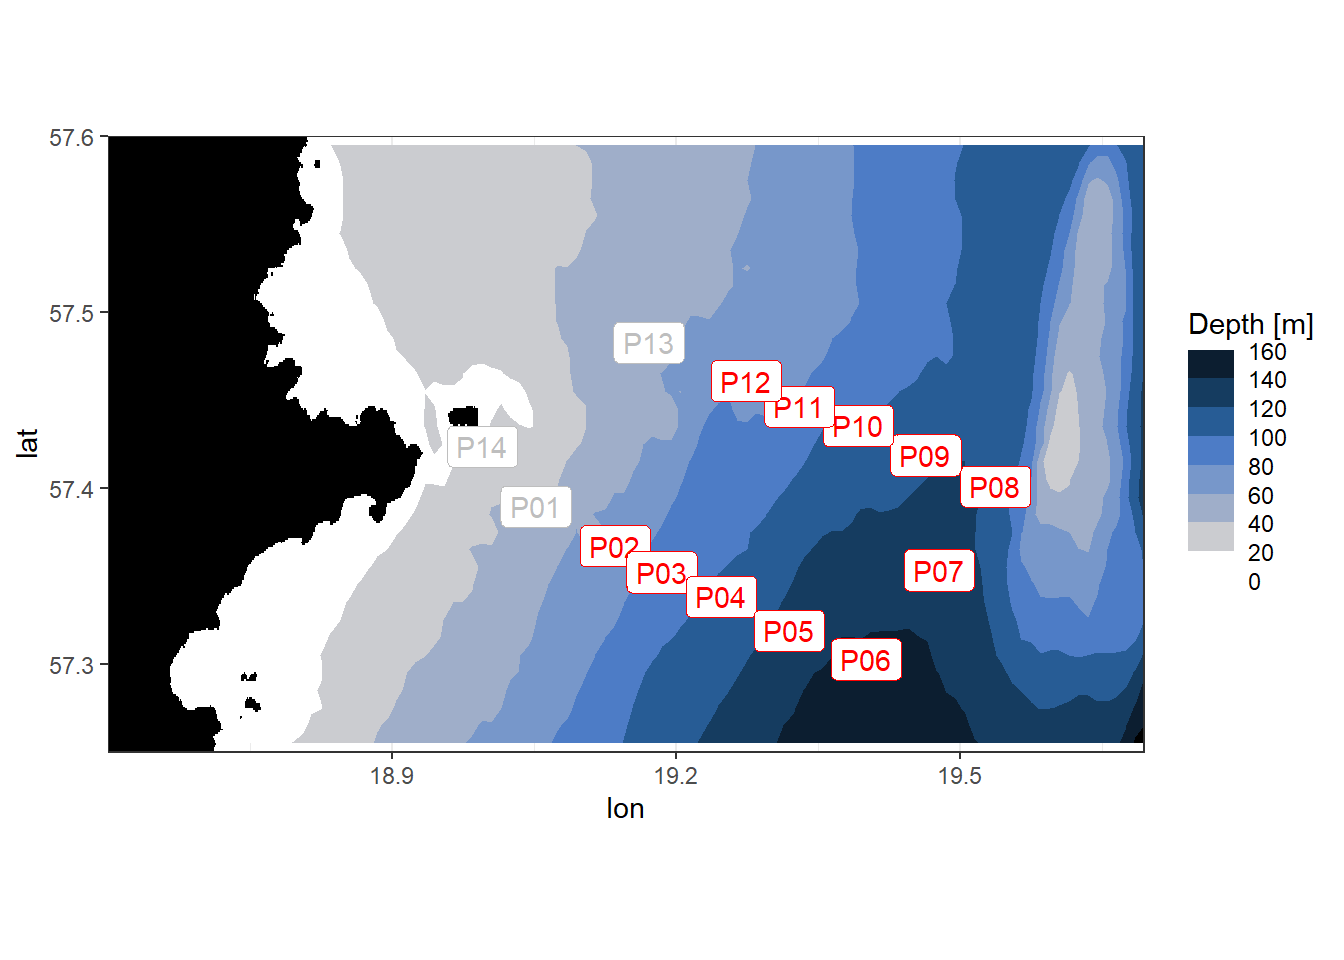 Location of stations sampled between the east coast of Gotland and Gotland deep.